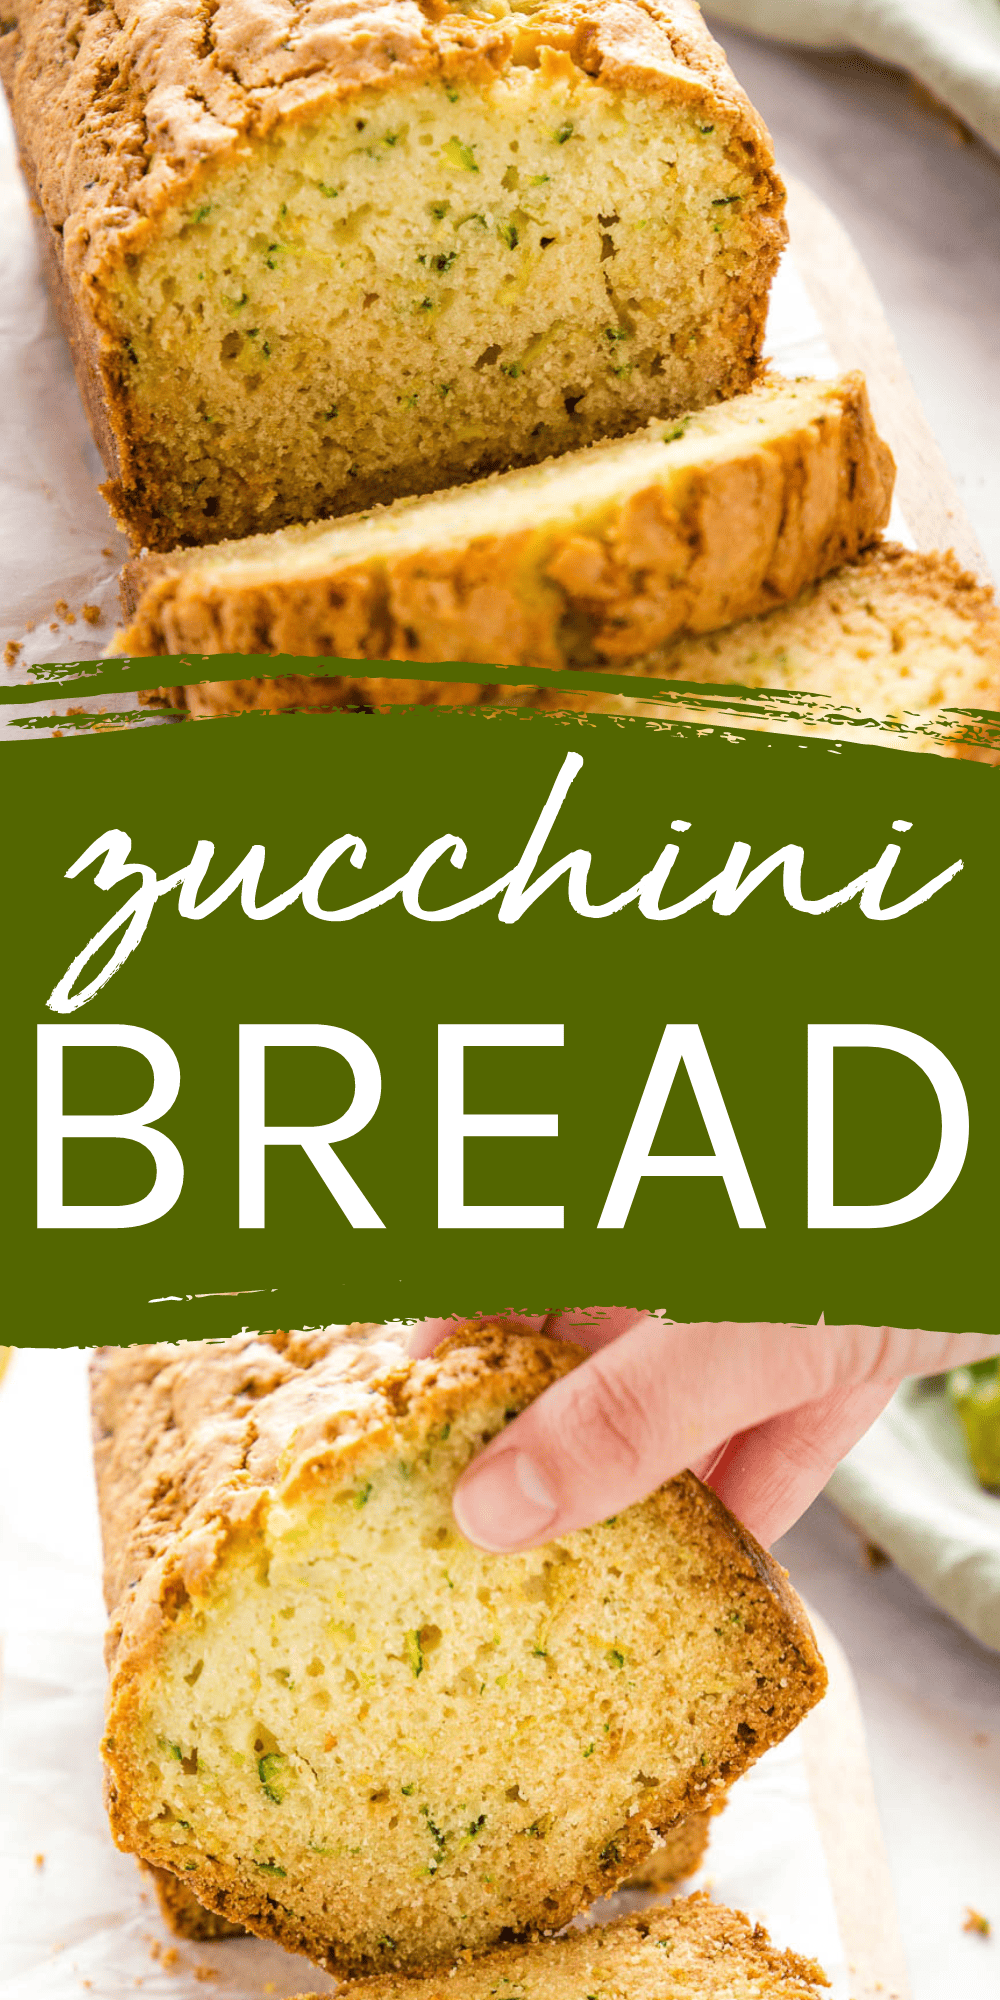 This Zucchini Bread recipe is a moist and tender loaf cake packed with fresh zucchini and flavoured with lemon. Easy to make in one bowl! Recipe from thebusybaker.ca! #zucchinibread #zucchini #zucchinibreadrecipe #quickbreadrecipe #zucchiniloaf #summerbaking #easybaking #howtobake #bakingtutorial #zucchinirecipe via @busybakerblog